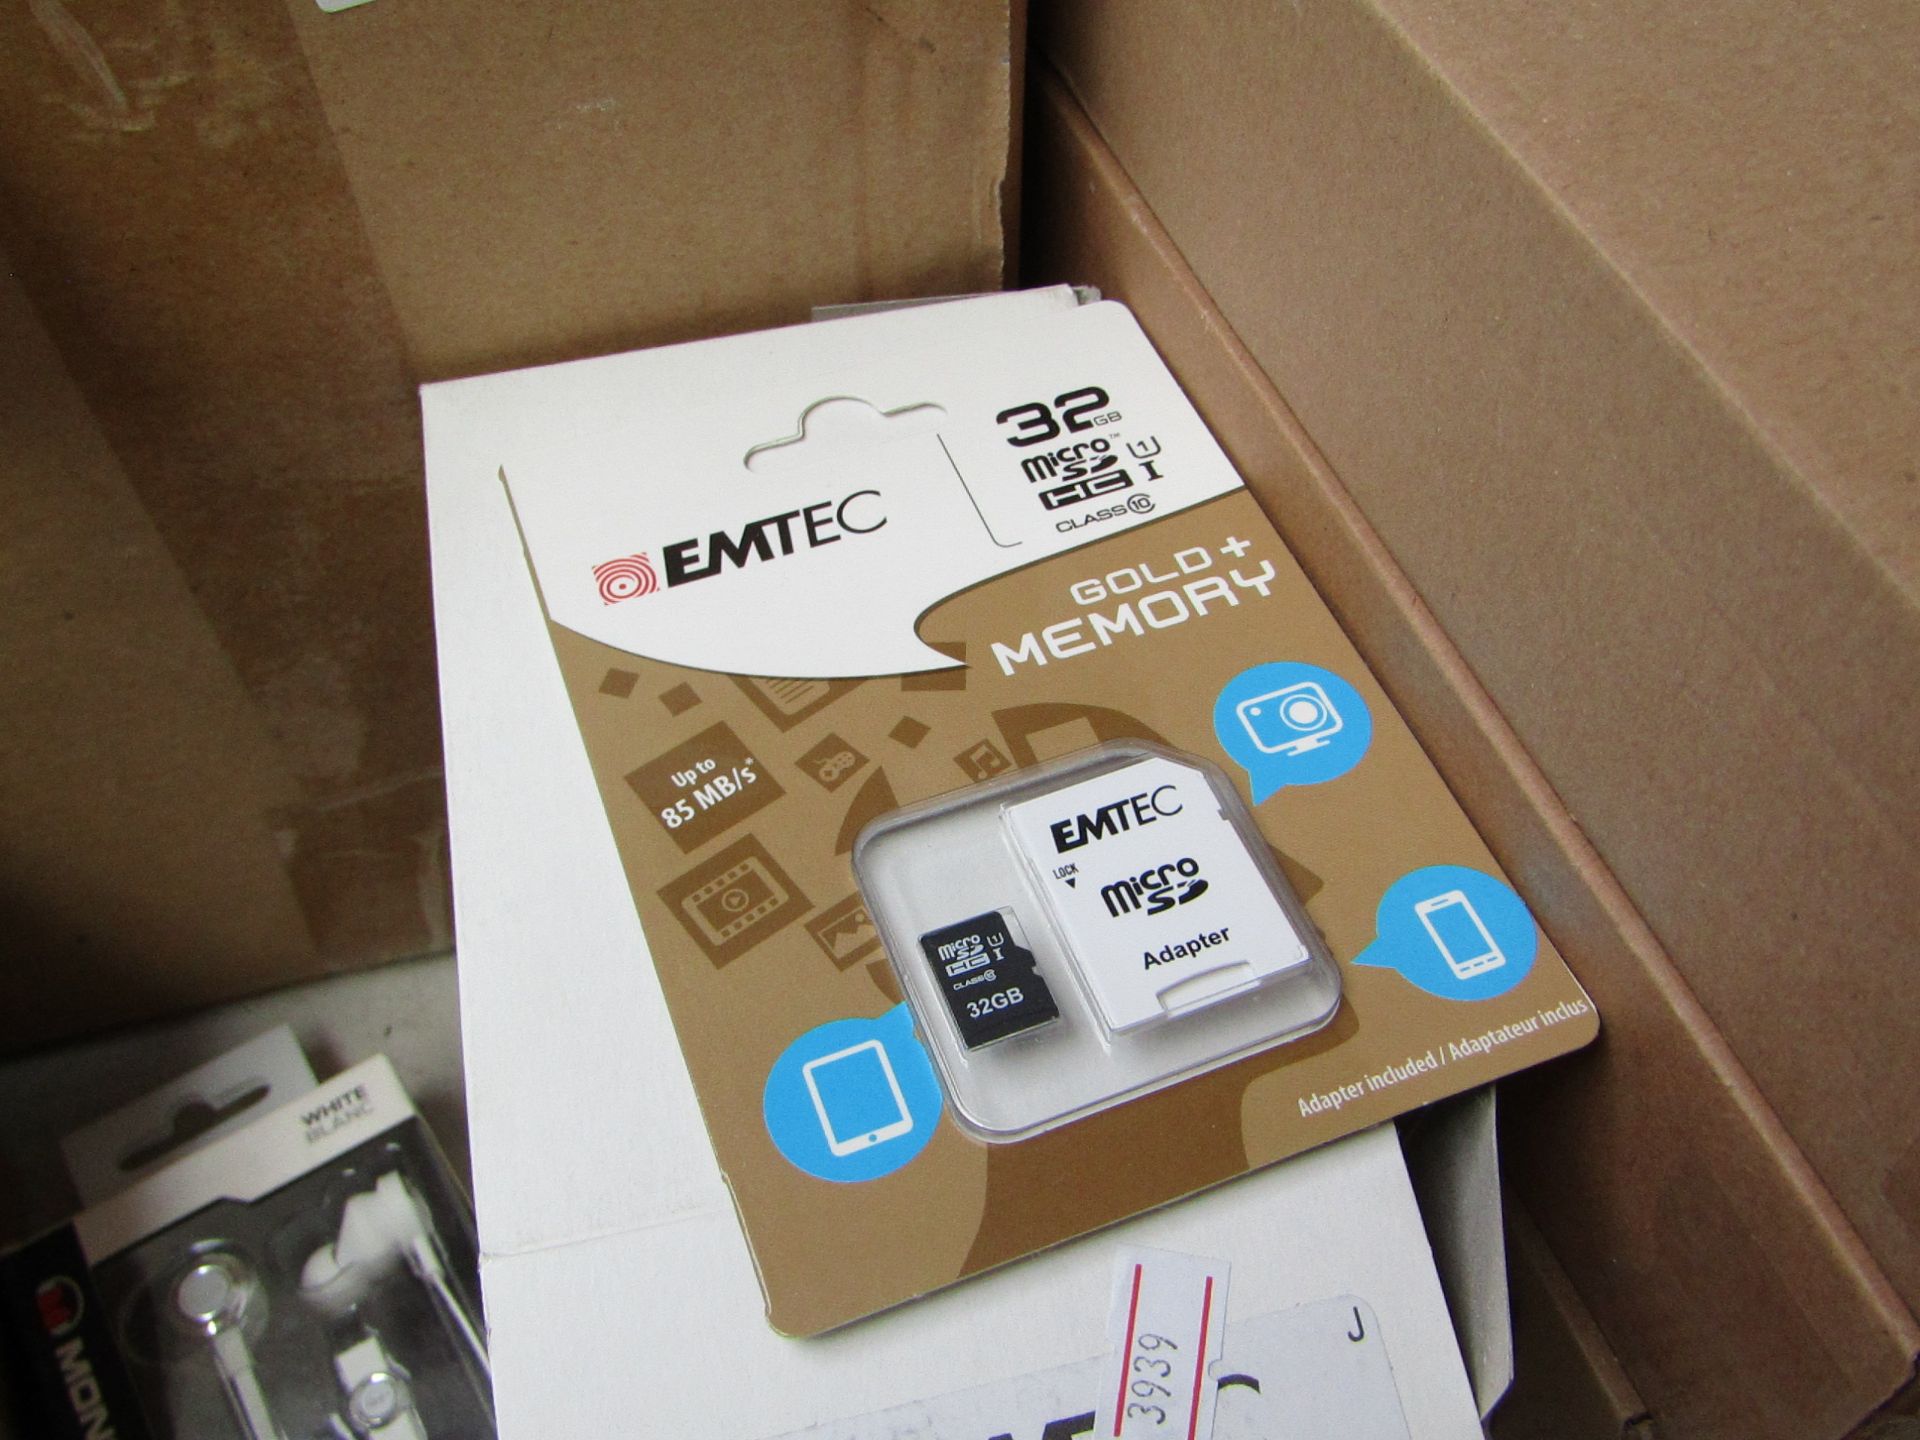 Em Tec 32GB Gold Plus memory card with adaptor, new and packaged.